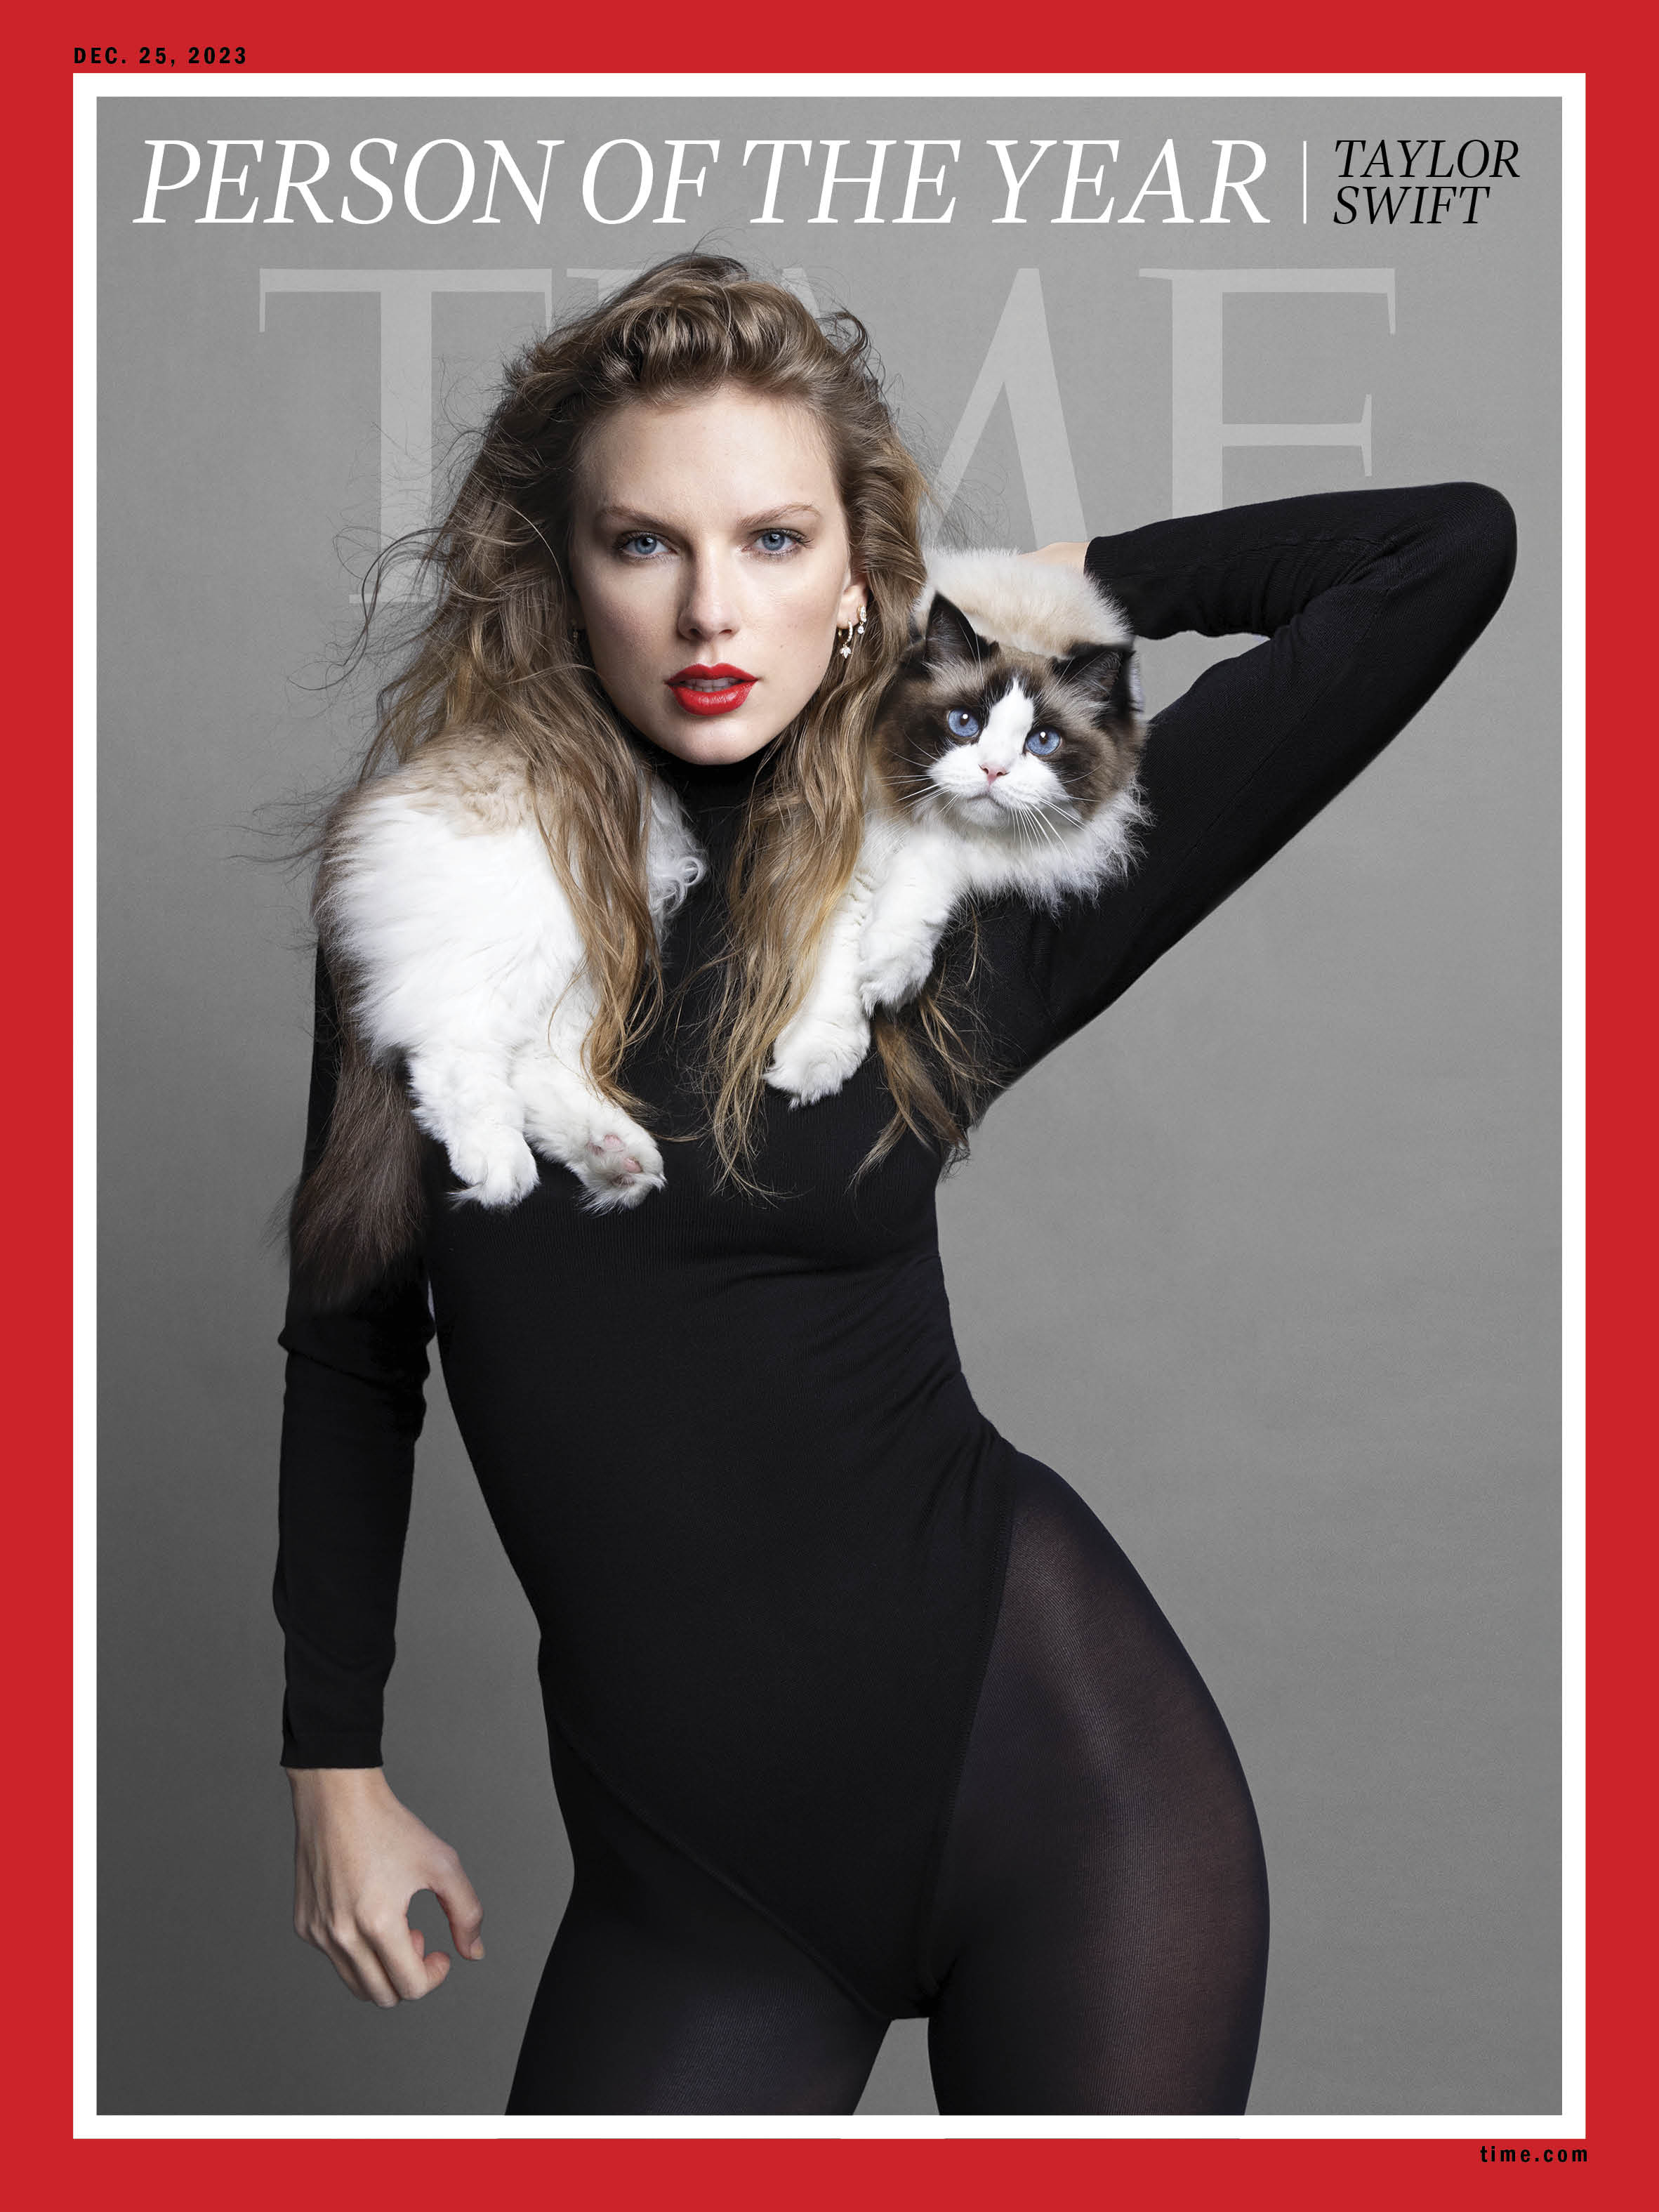 TikTokers Are Trying to Recreate Taylor Swift’s TIME Person of the Year Cover—And Their Cats Aren’t Having It